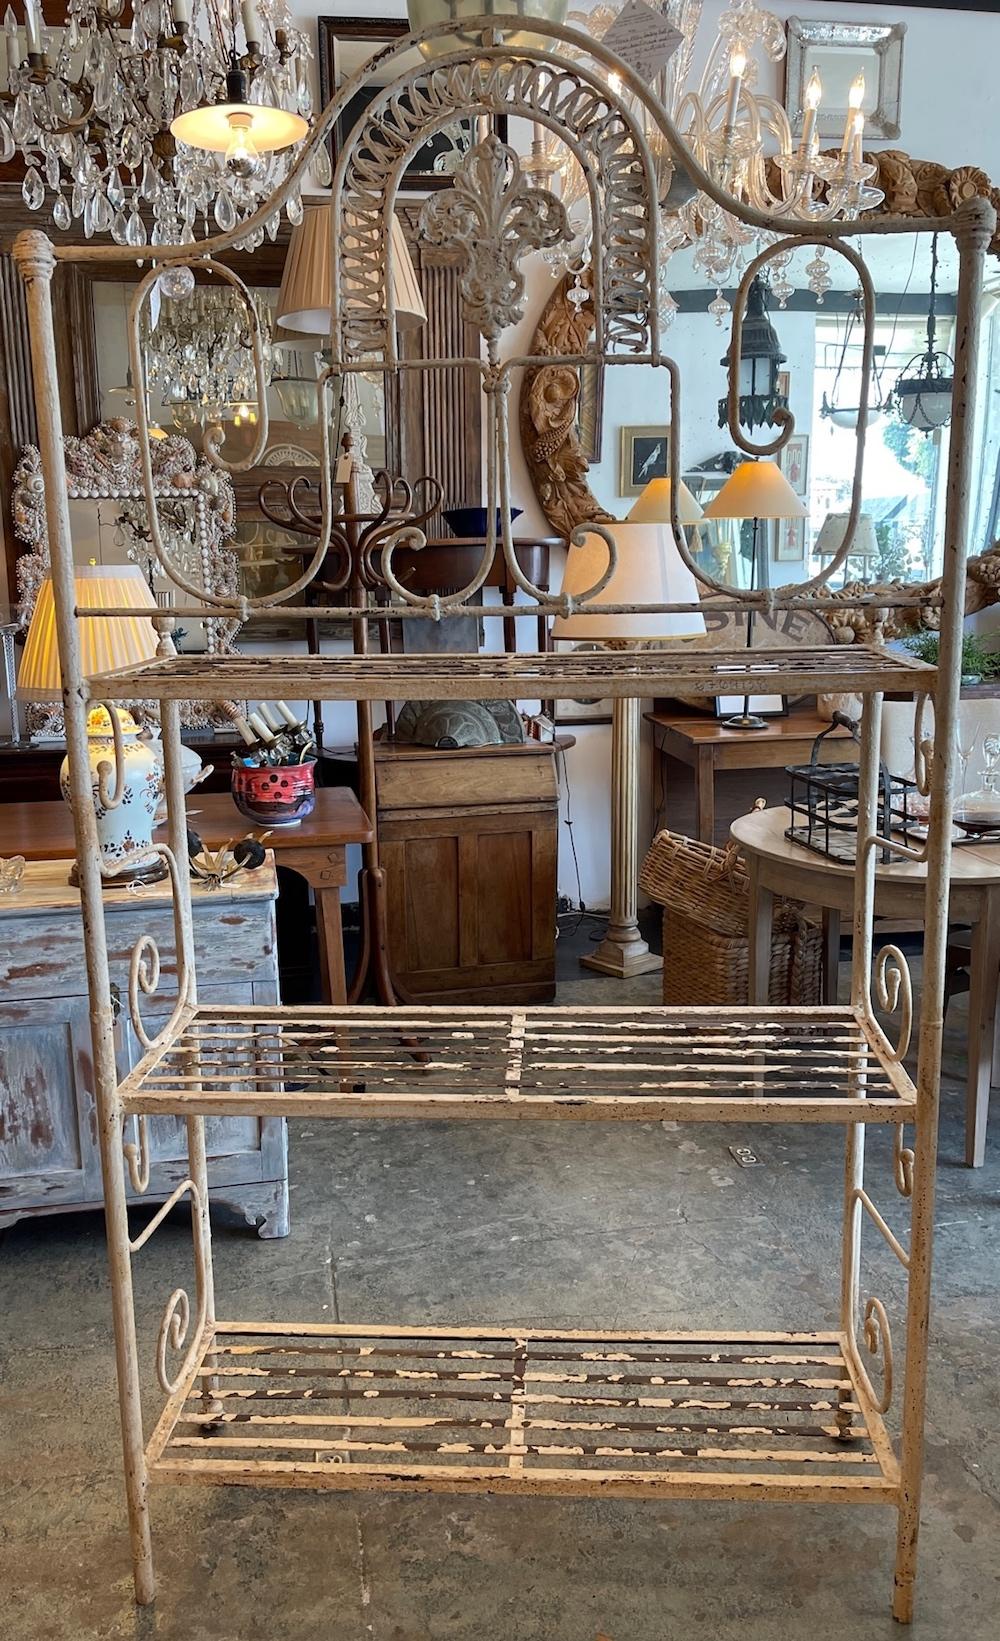 This is a very fine example of a wrought iron 19th century French bakers rack. The iron is shaped in many designs on the upper section with more designs on both sides. Though painted some of it has flaked away.